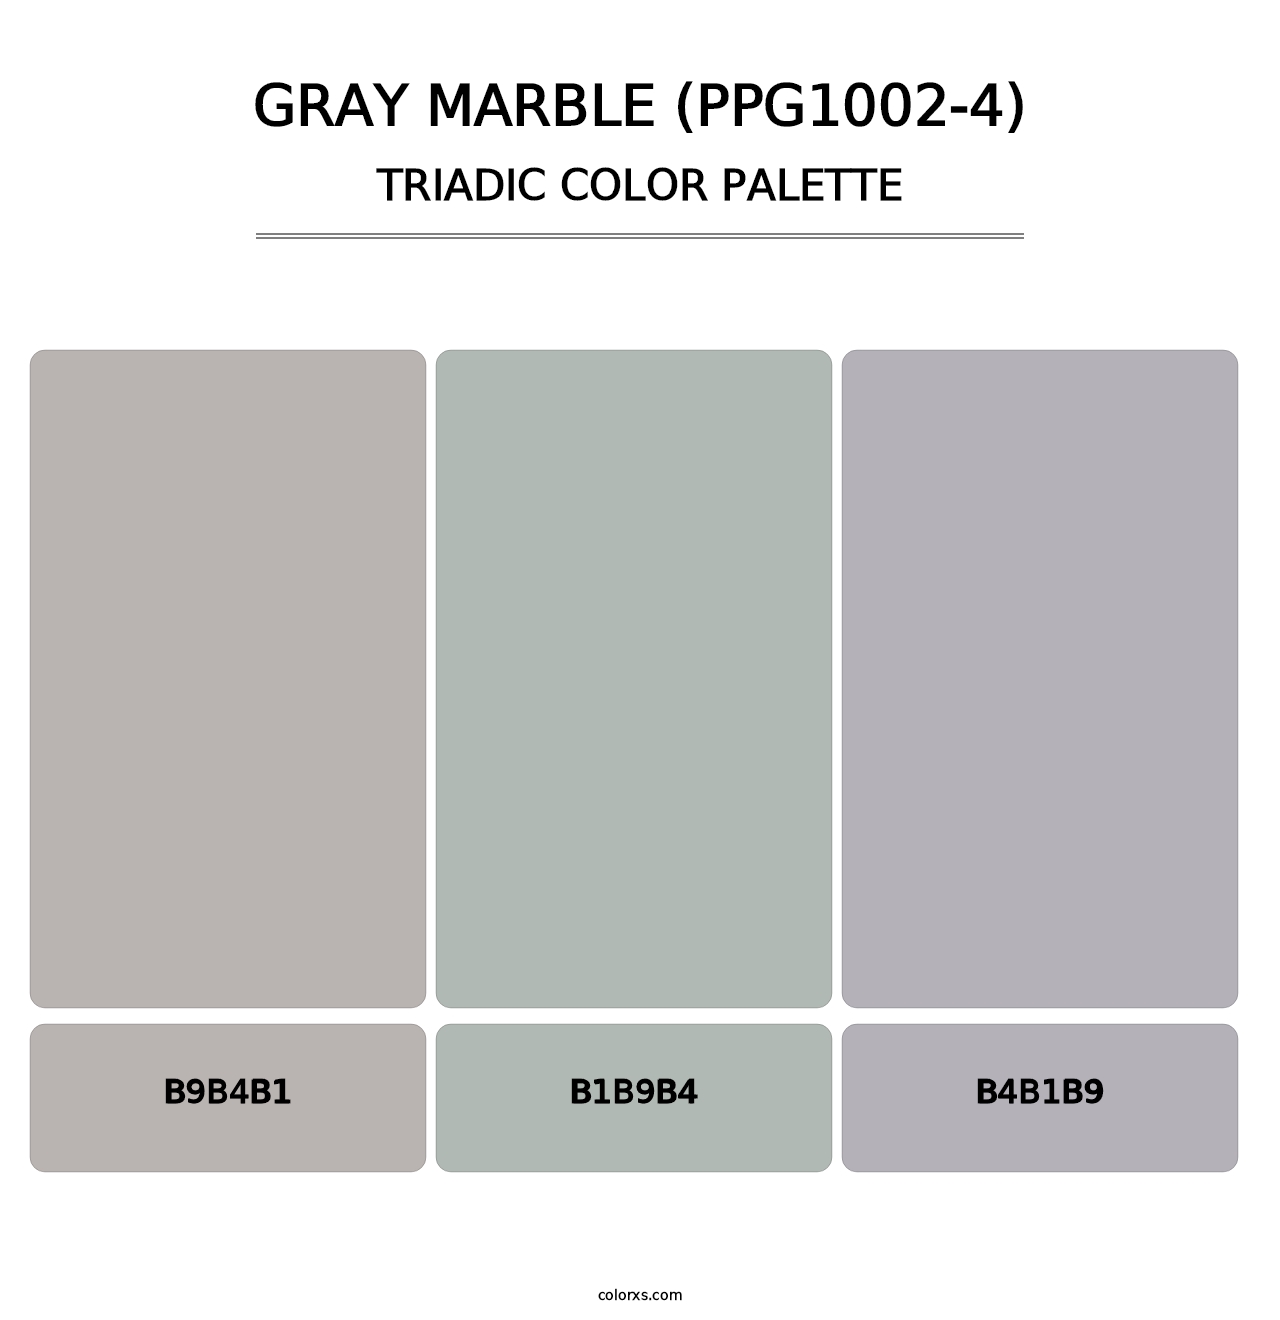 Gray Marble (PPG1002-4) - Triadic Color Palette